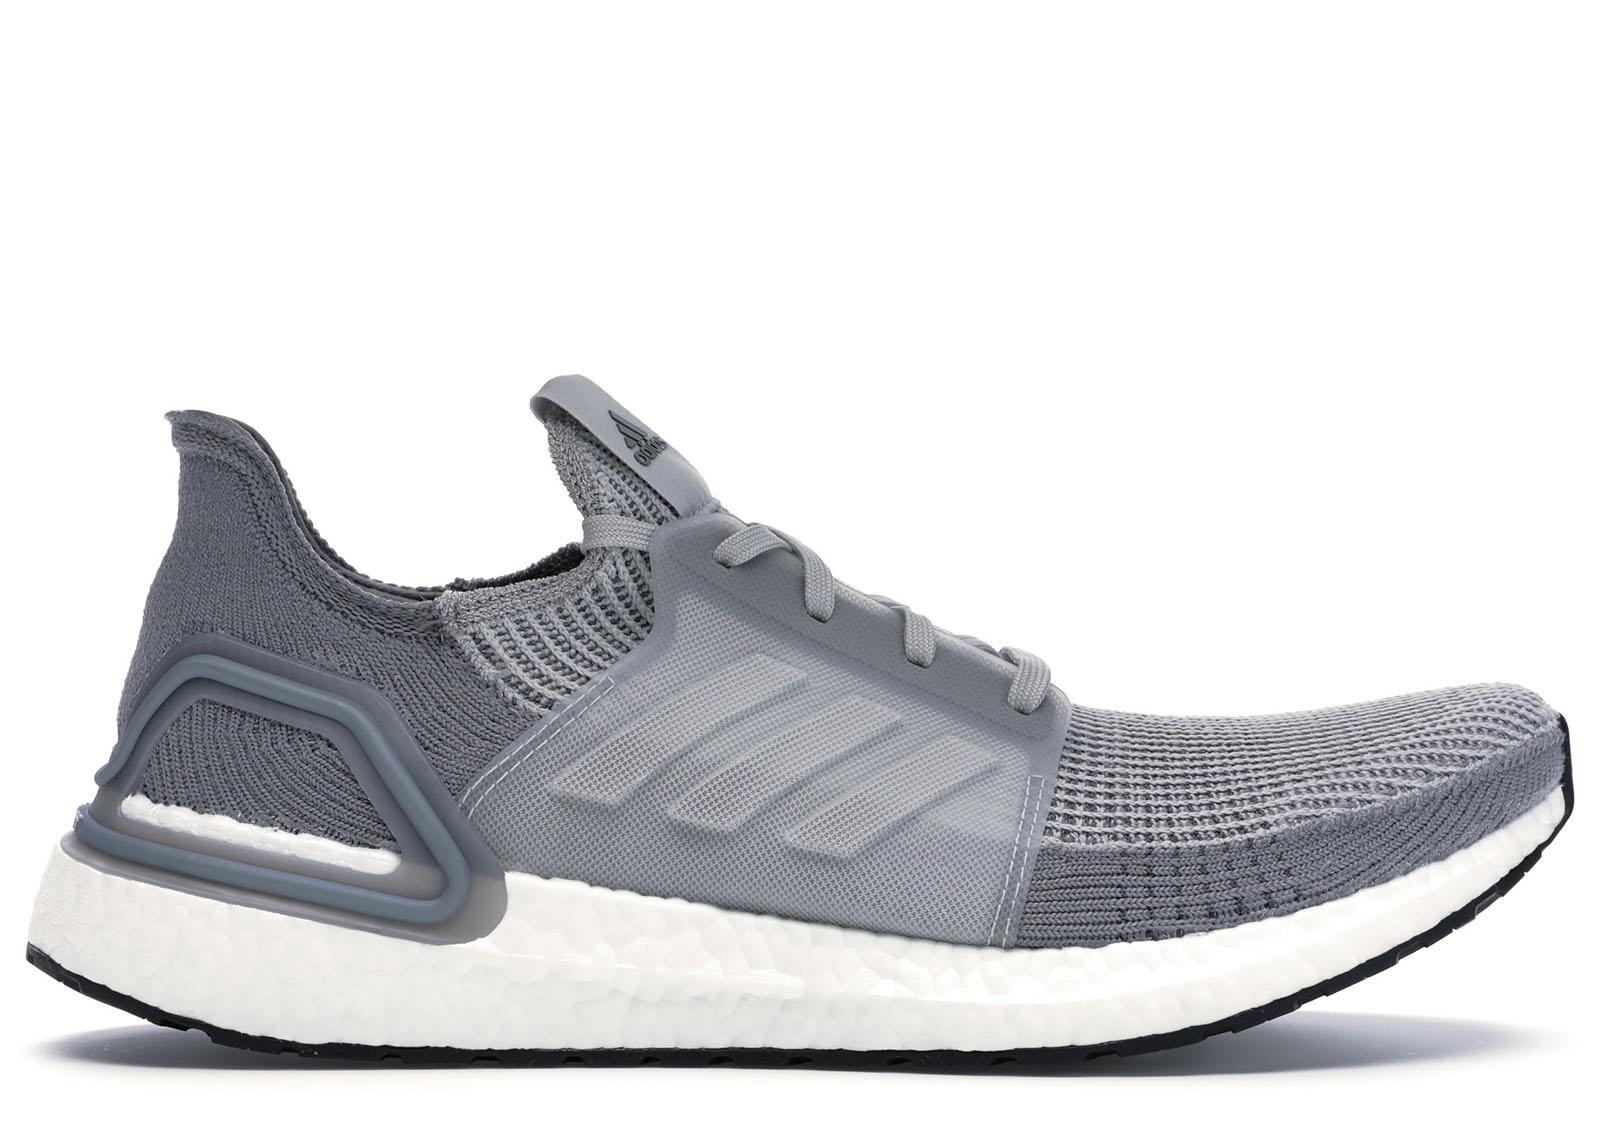 adidas Ultra Boost 19 Grey Two in Gray for Men - Lyst